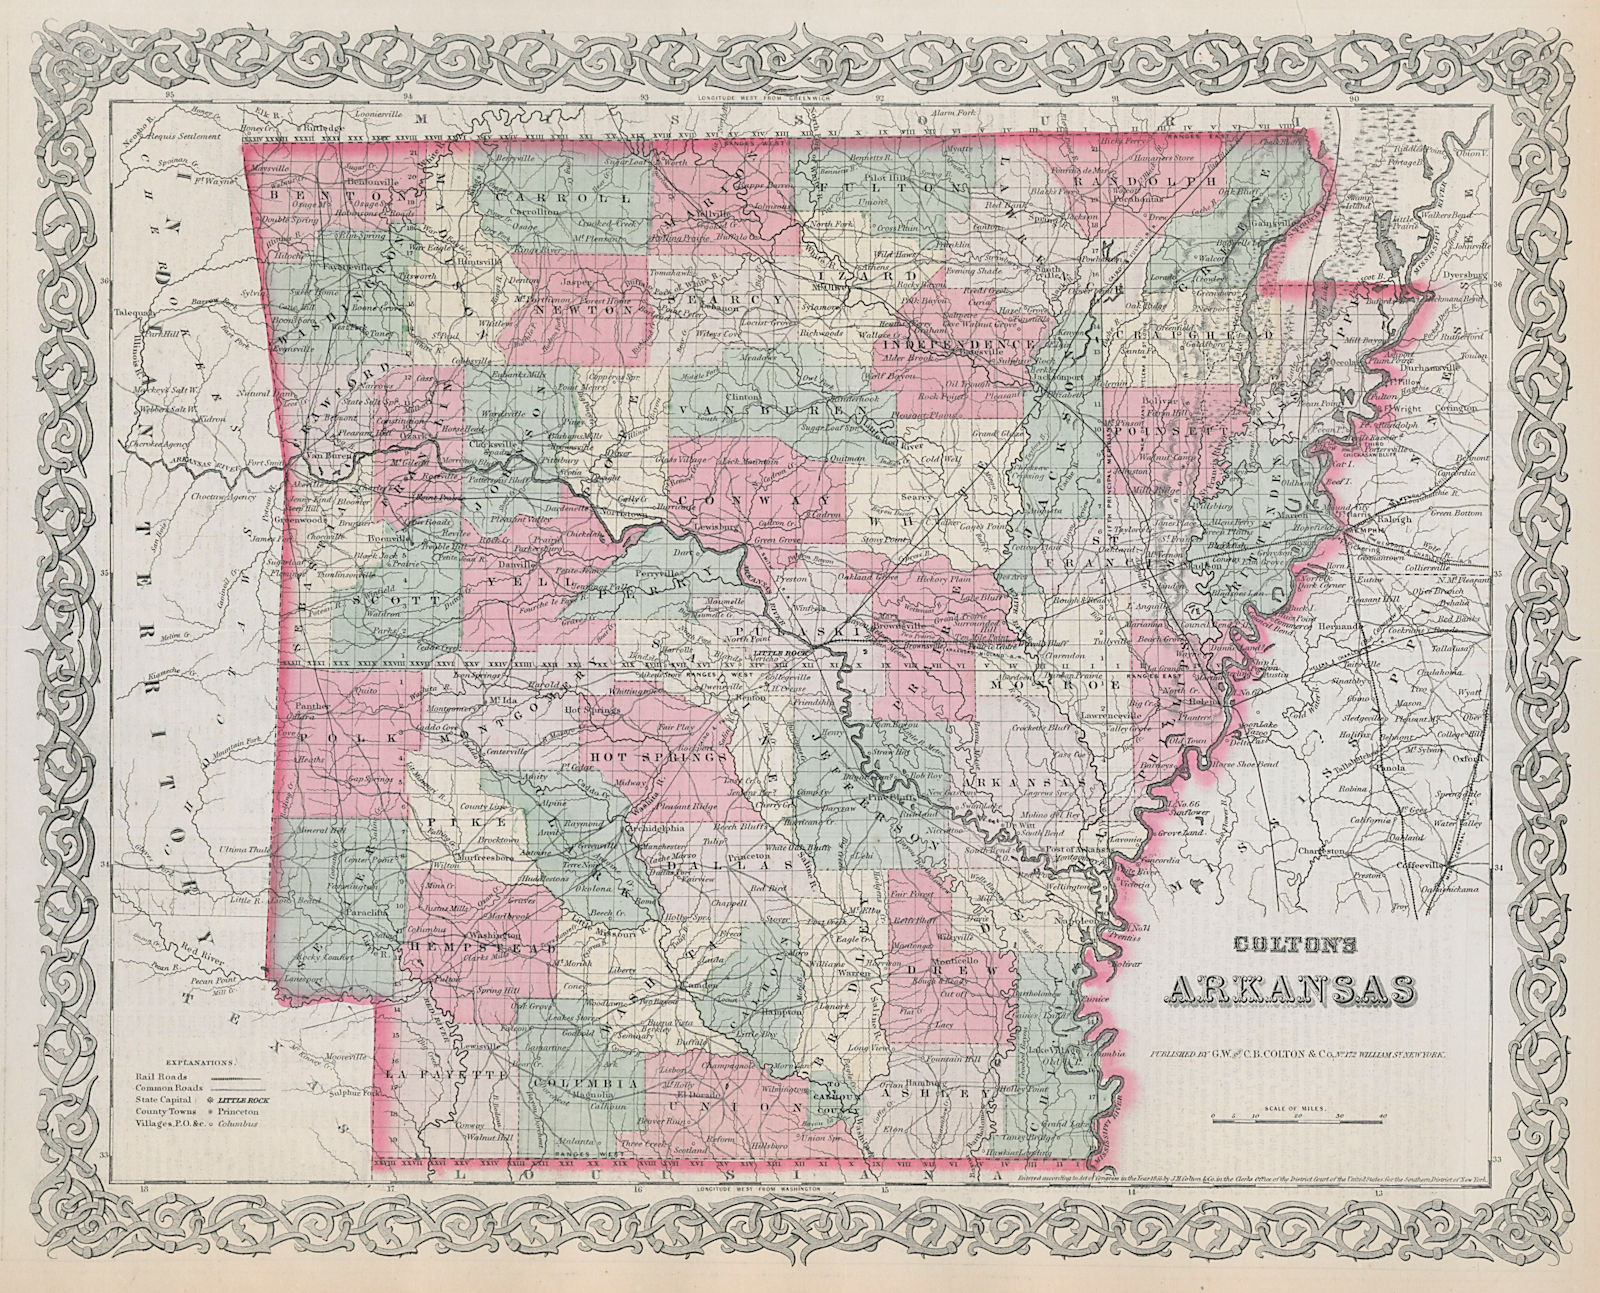 Associate Product Colton's Arkansas. Decorative antique US state map 1869 old chart